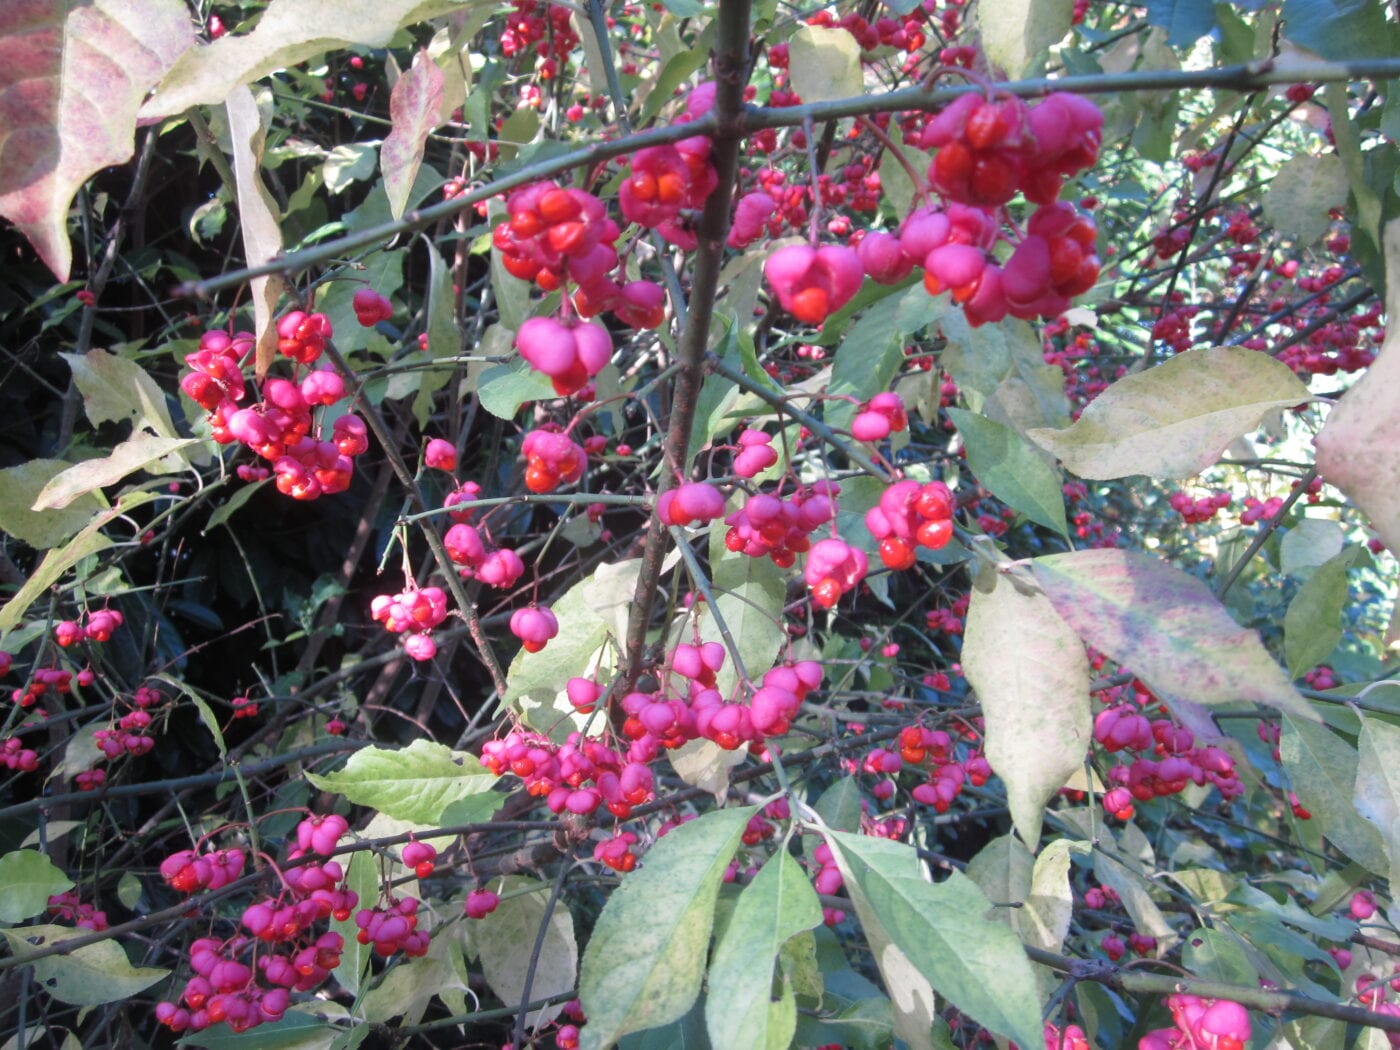 Spindle tree fruit in autumn